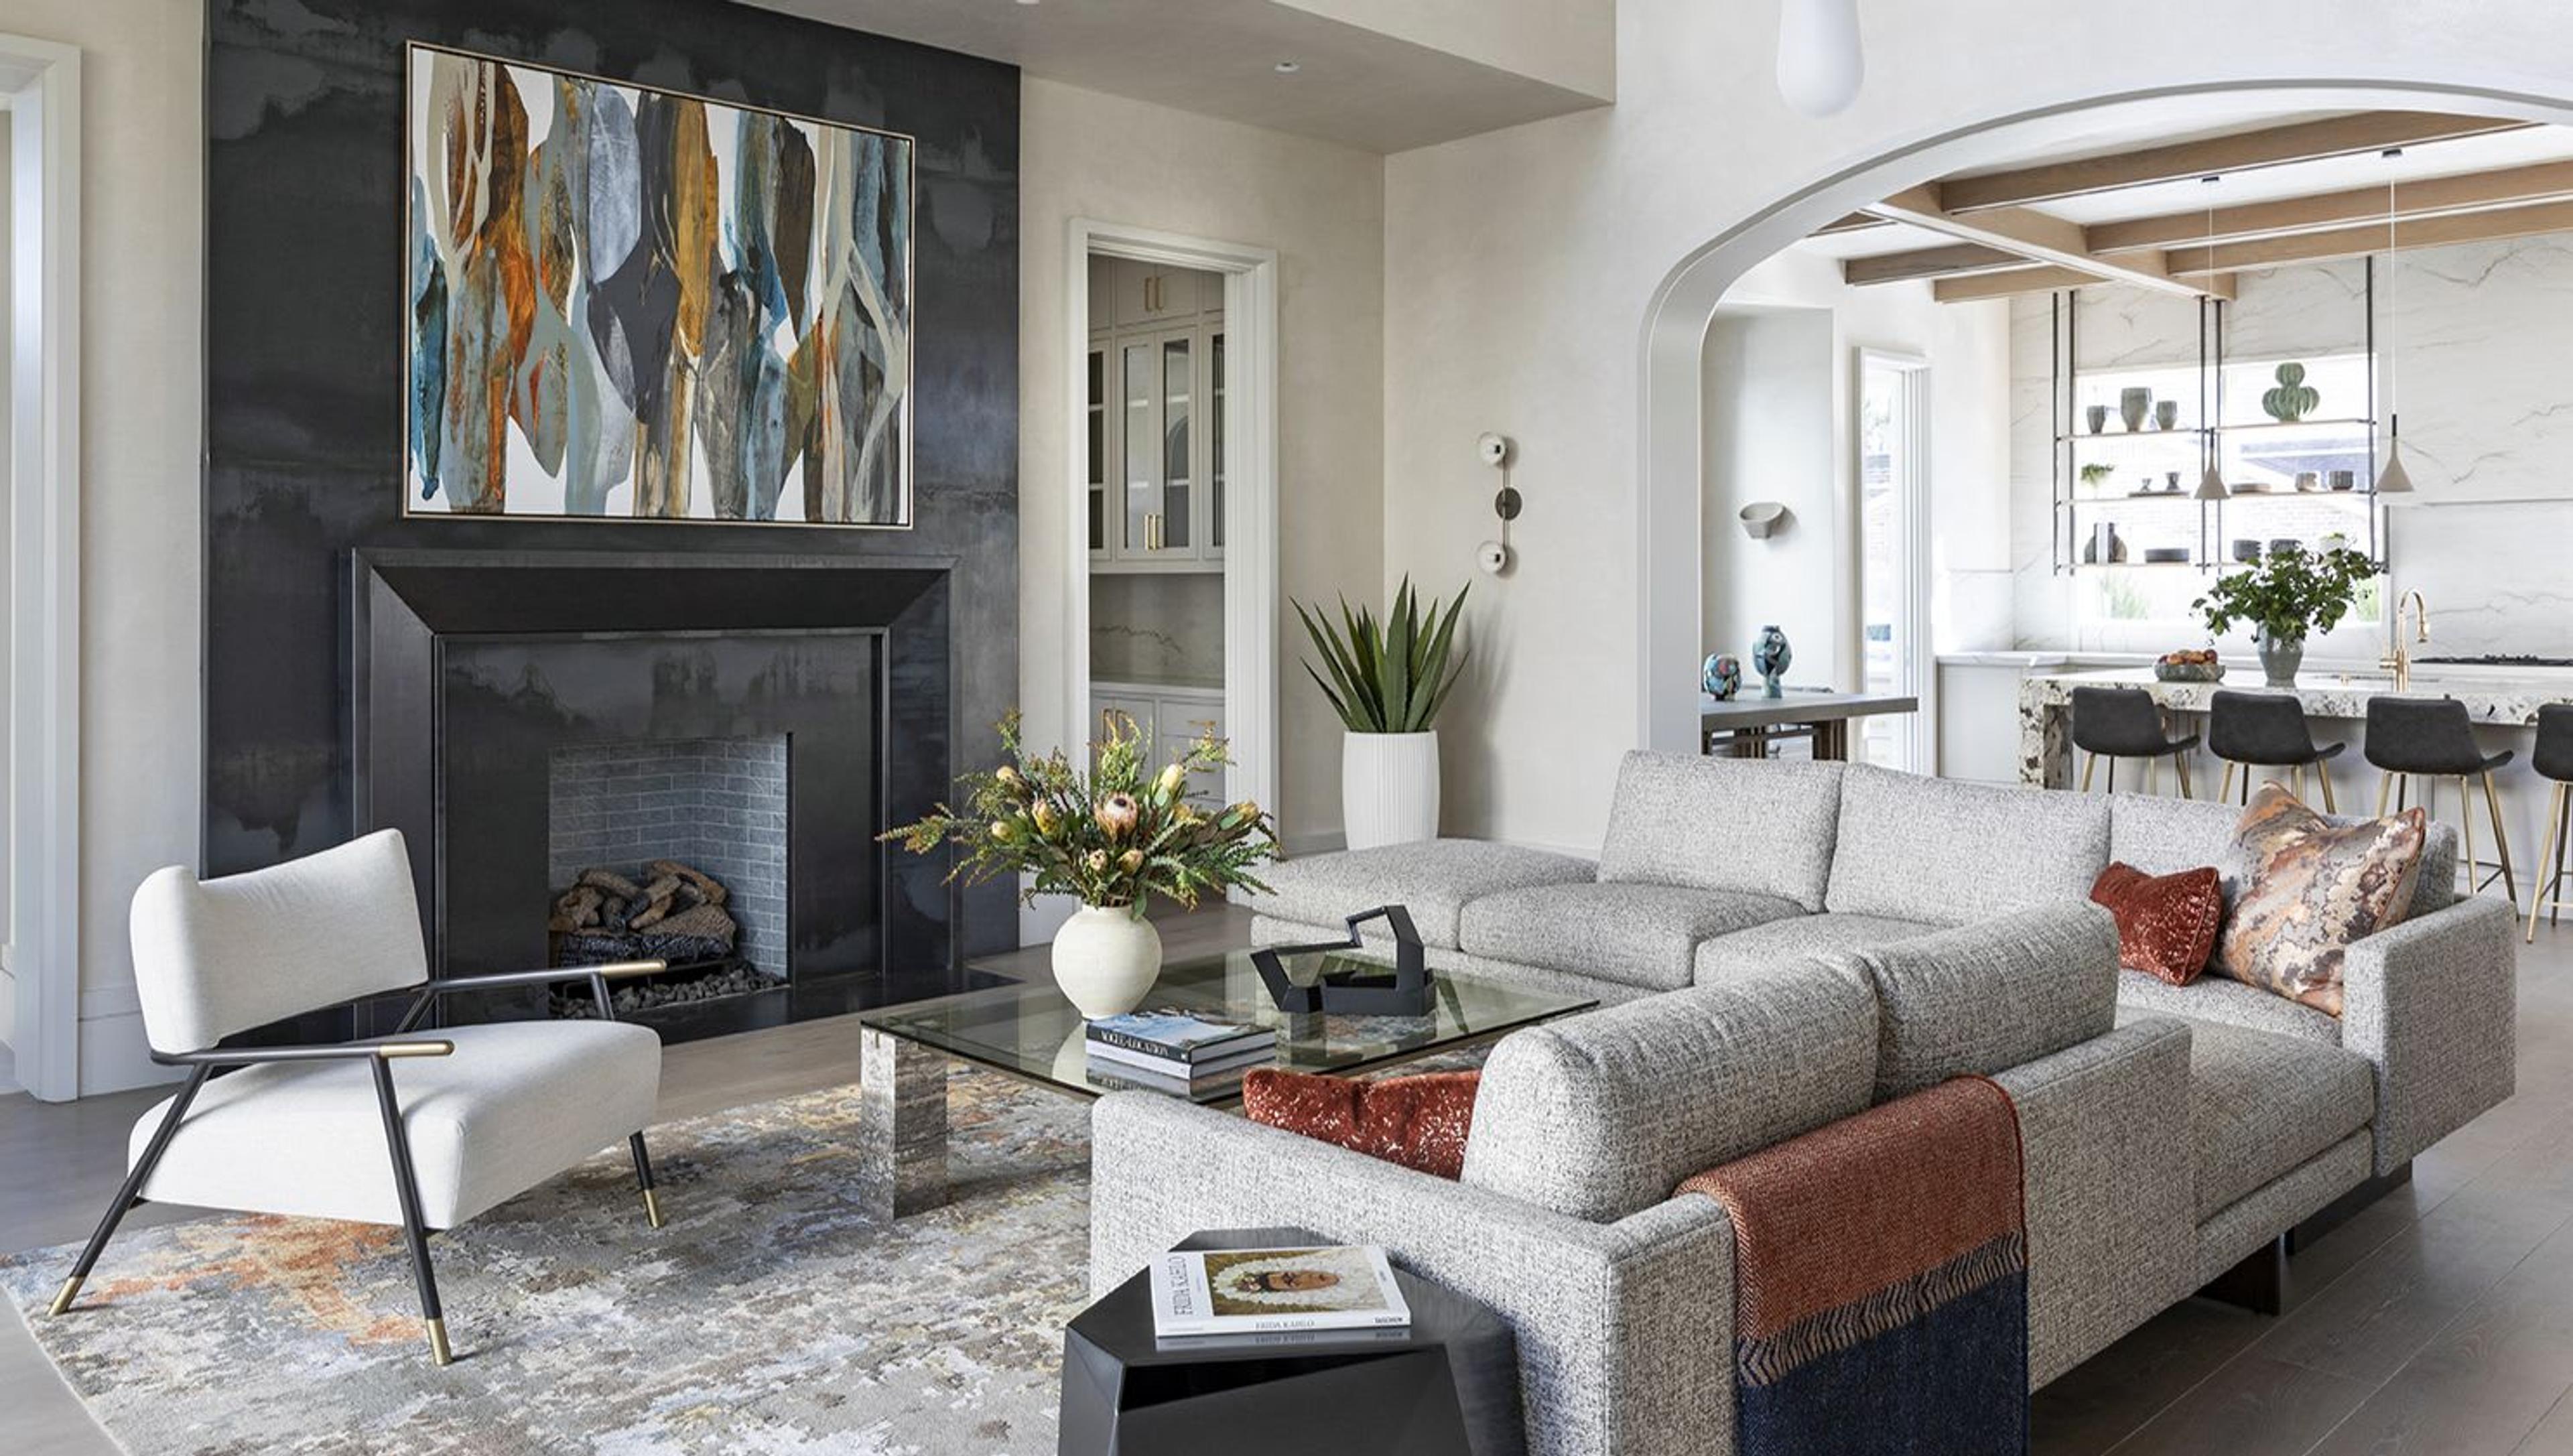 Connected to both the kitchen and the dining space, this living room offers ample seating and access to the home’s surrounding pool and grounds. The fireplace is particularly noteworthy as it is constructed from blackened steel, an aged metal finish with natural color variation and marbling that will continue to patina over time.